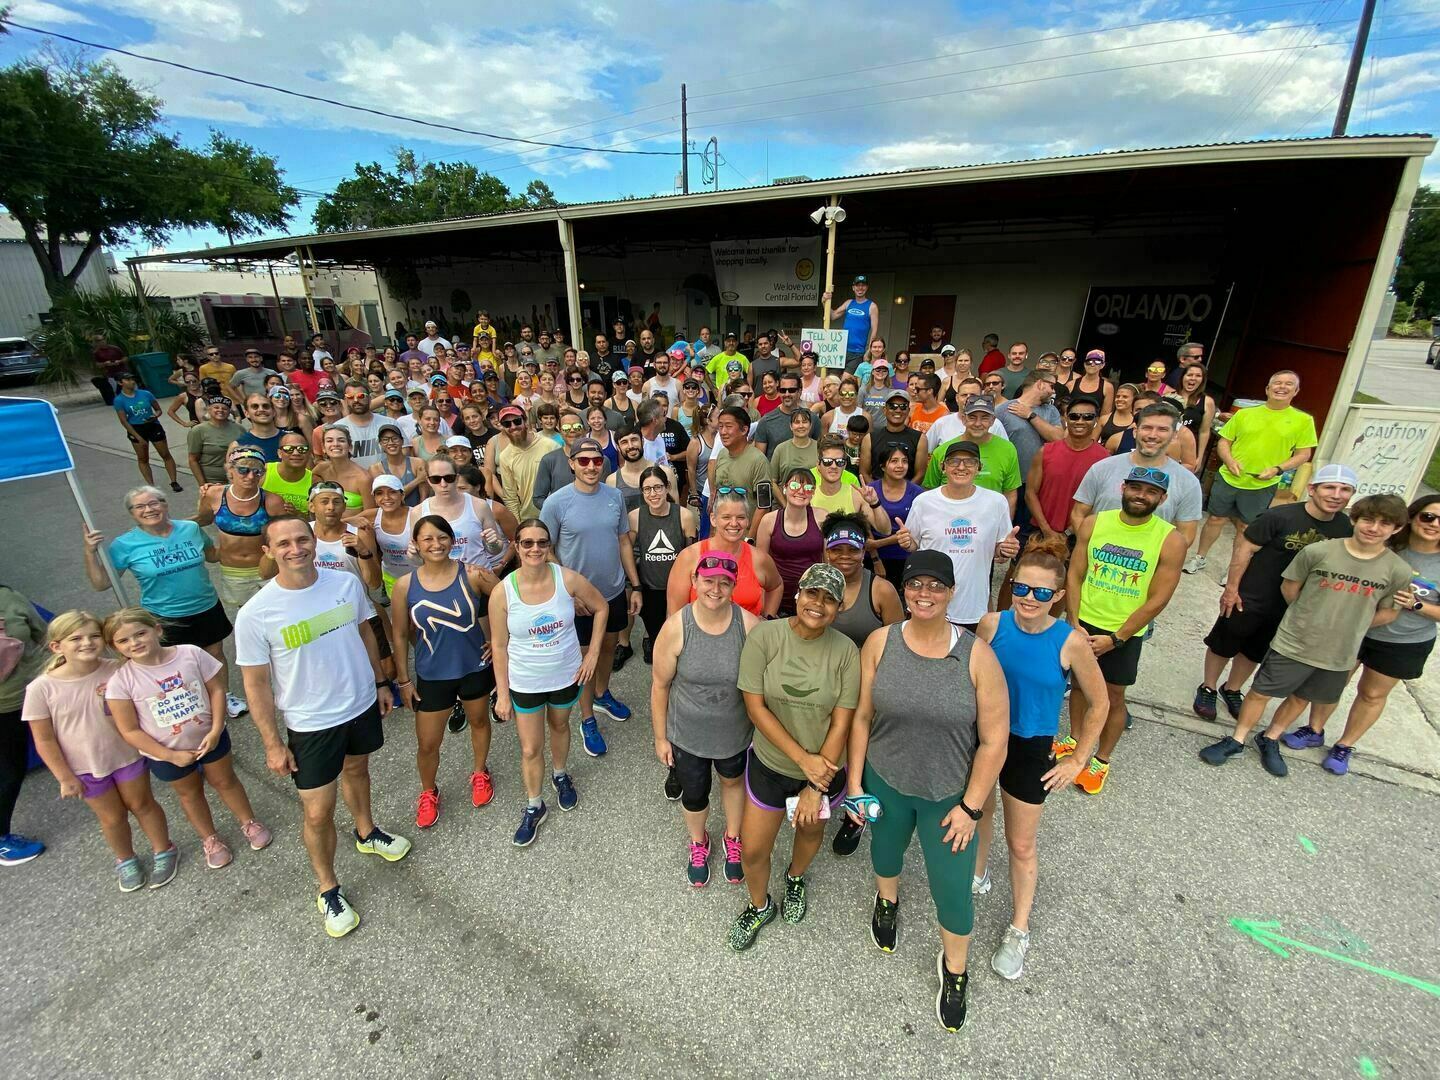 Track Shack Hosts Group Run with Outta Pocket Sponsored by ASICS and Ciele, Orlando, Florida, United States